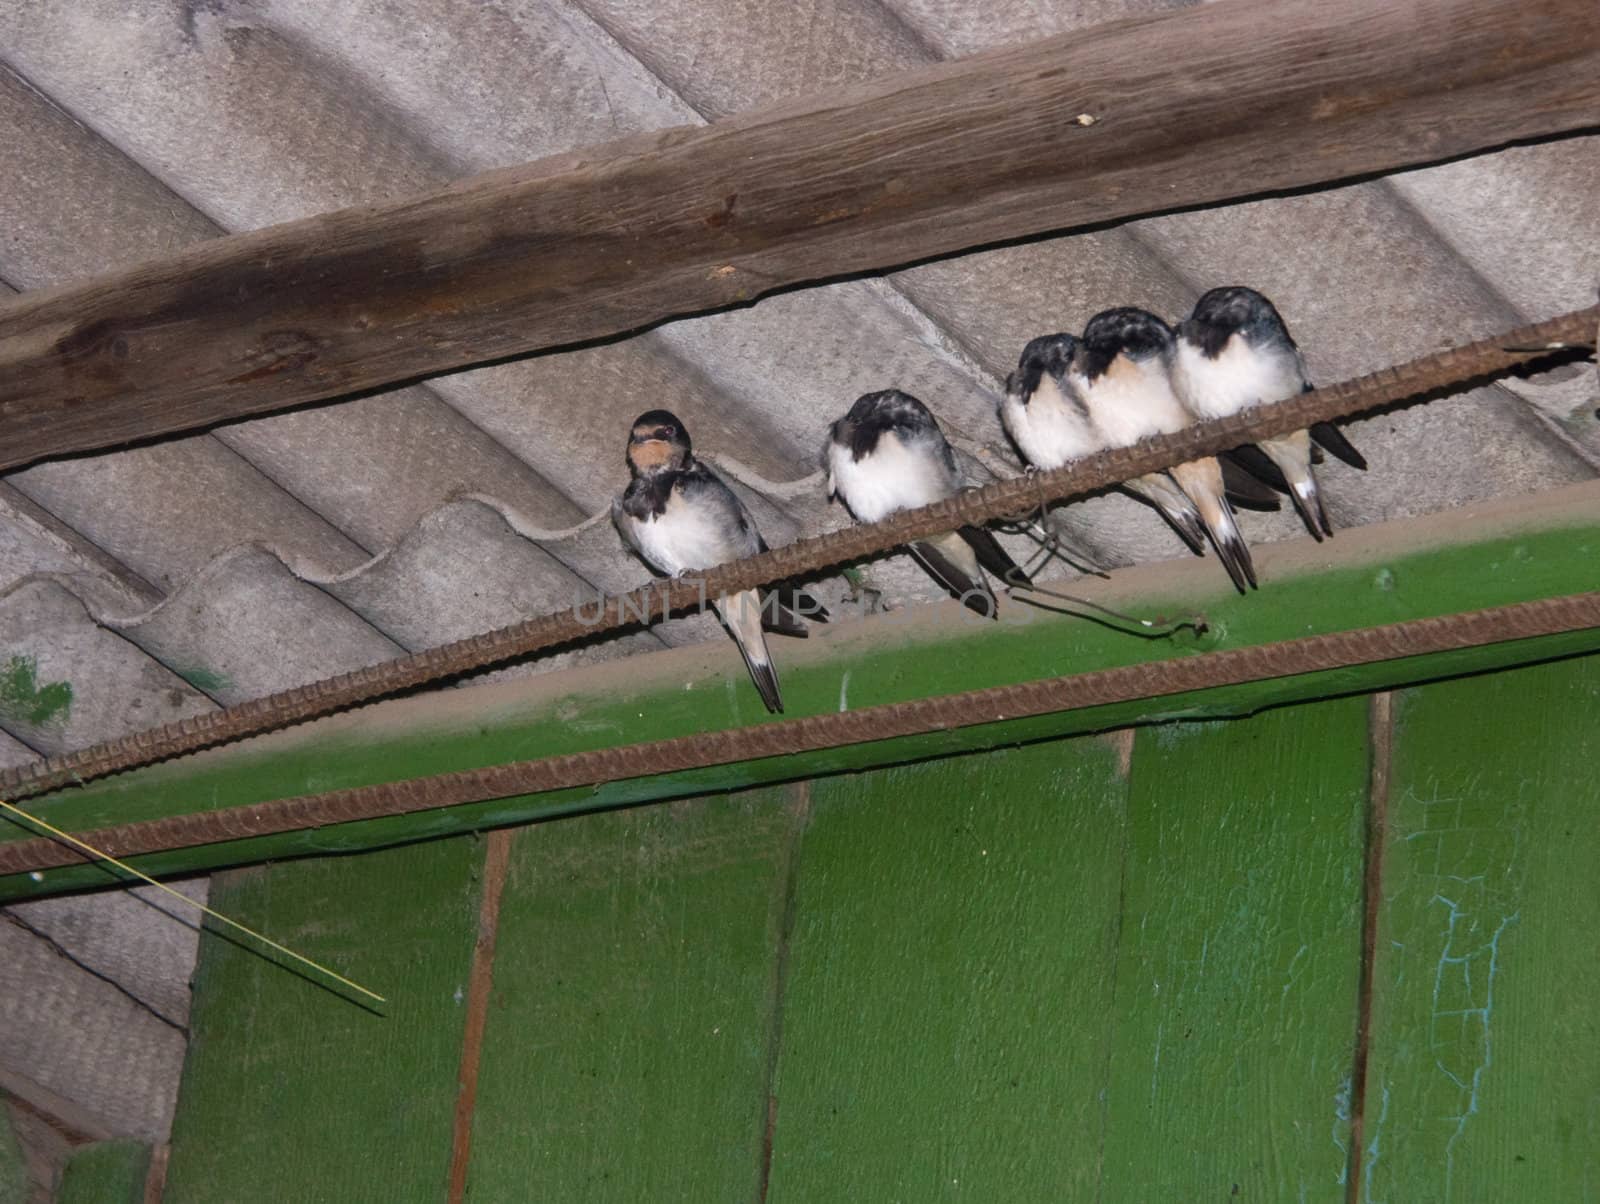 The image of five baby birds of a swallow